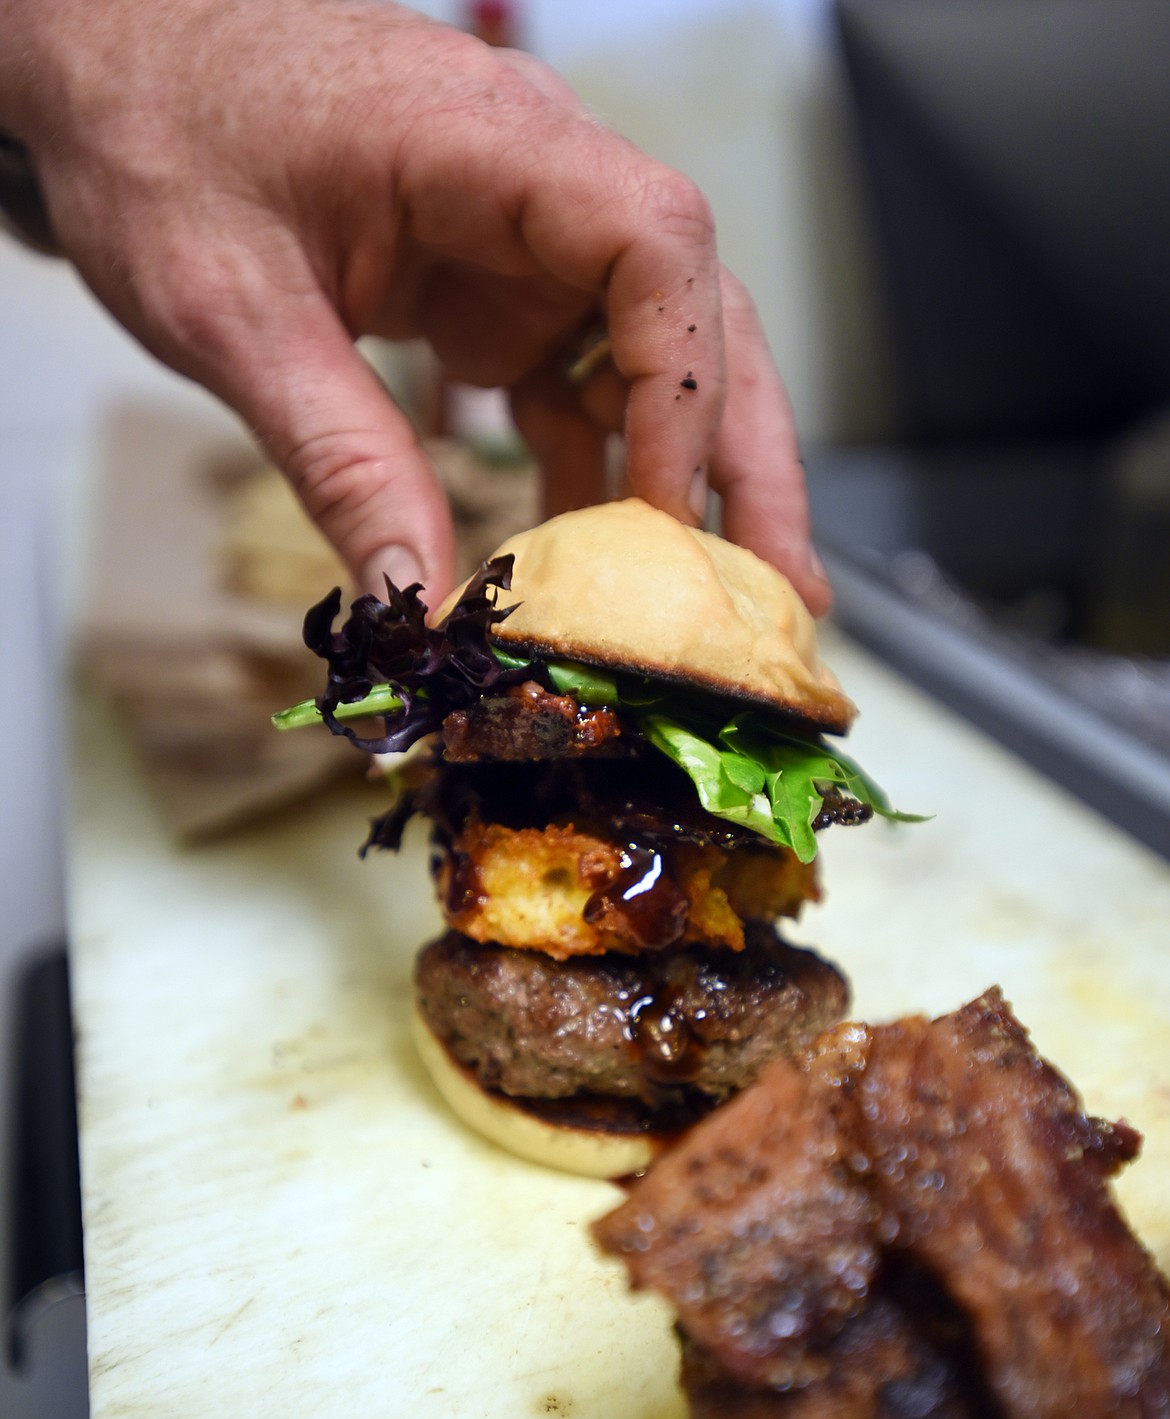 THE FINISHING touches are put on a burger at Piggyback BBQ in Whitefish.
(Brenda Ahearn/Daily Inter Lake)